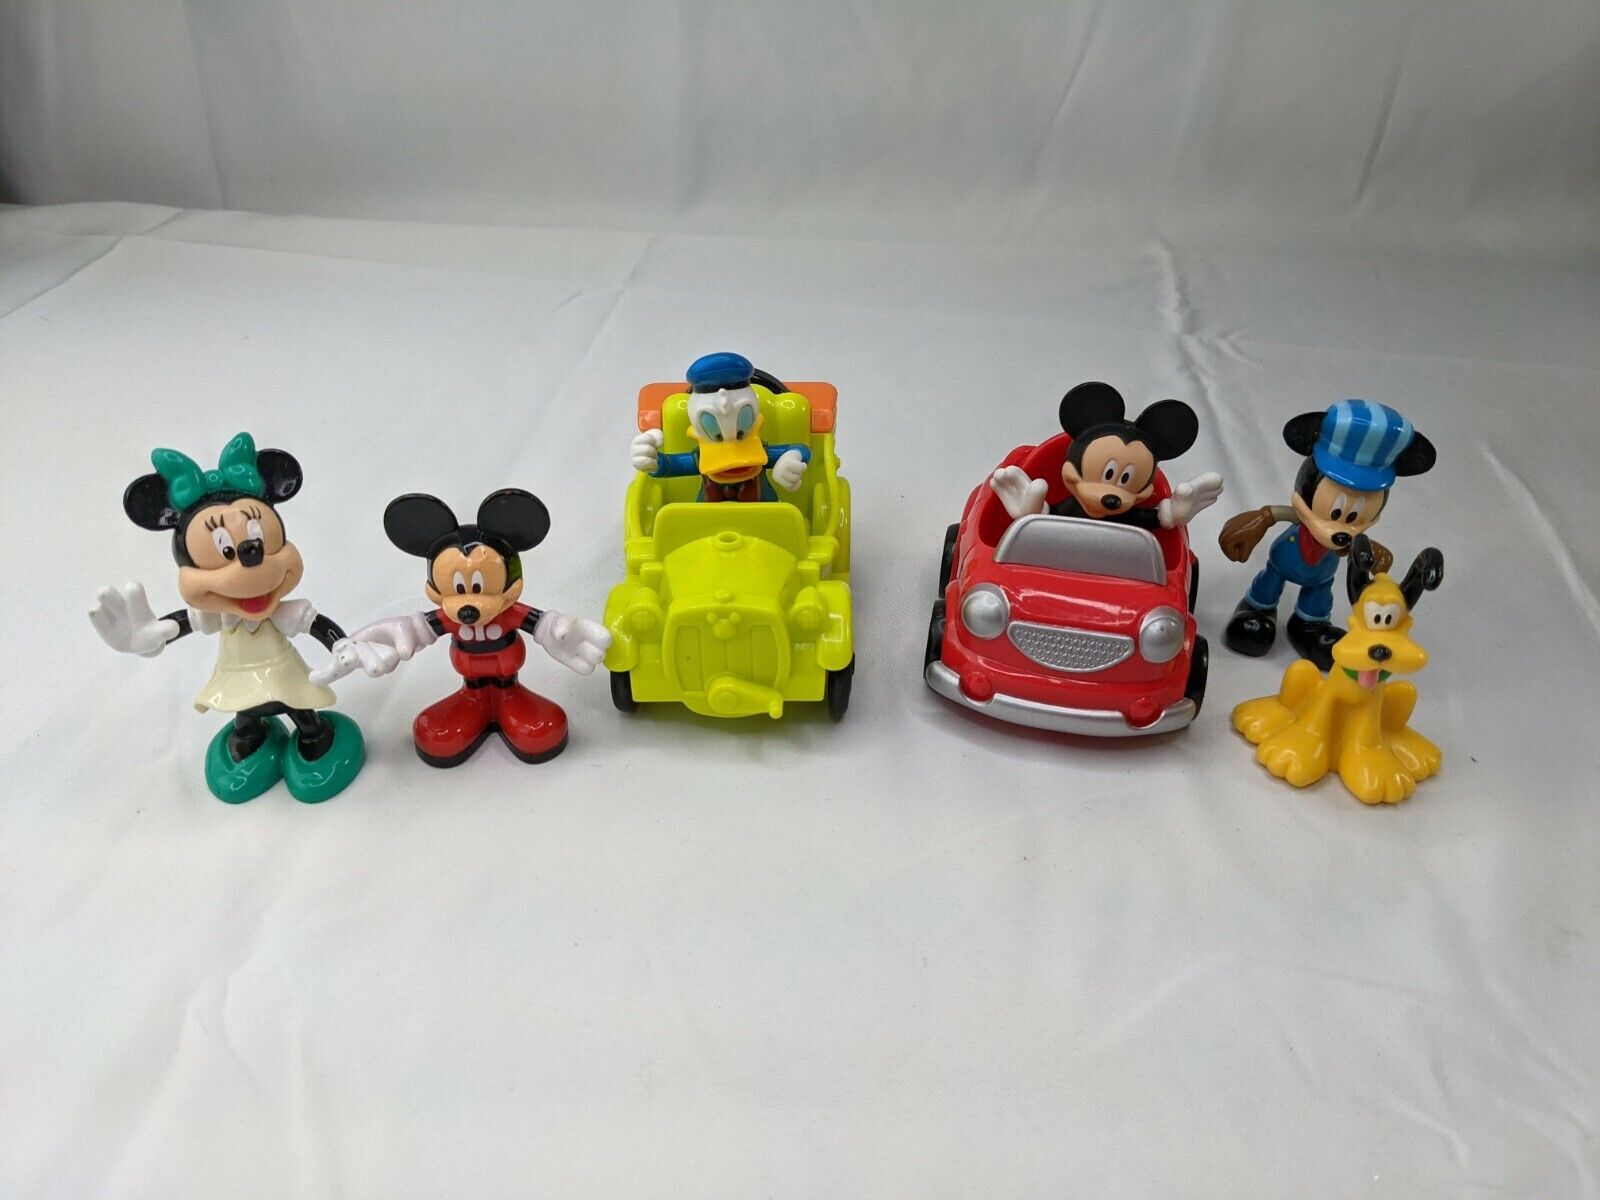 Disney Bendable Mickey Minnie Mouse Donald Duck Figures and Vehicles Lot